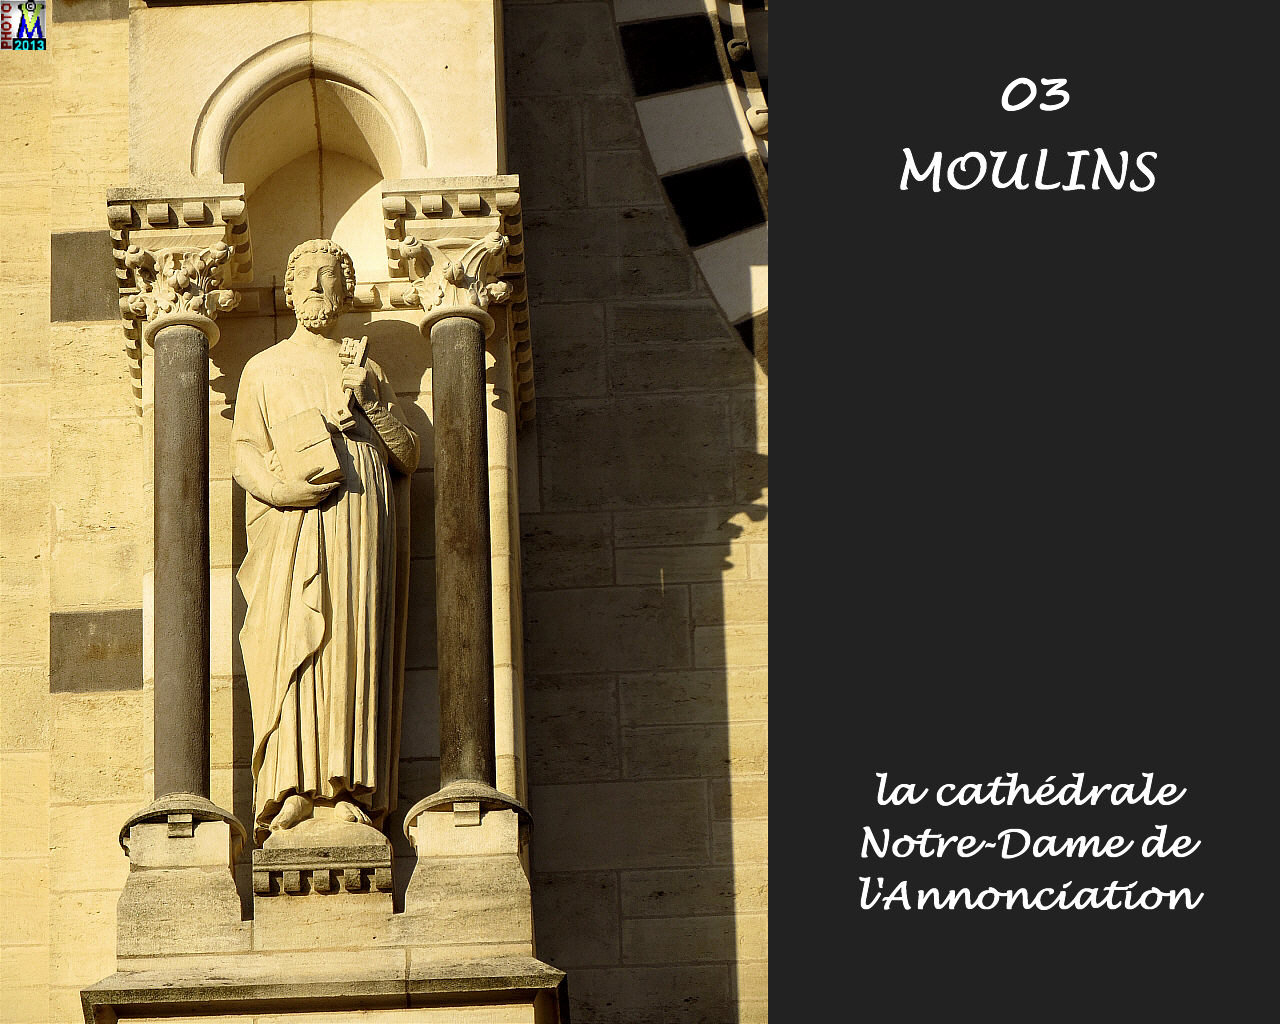 03MOULINS_cathedrale_124.jpg